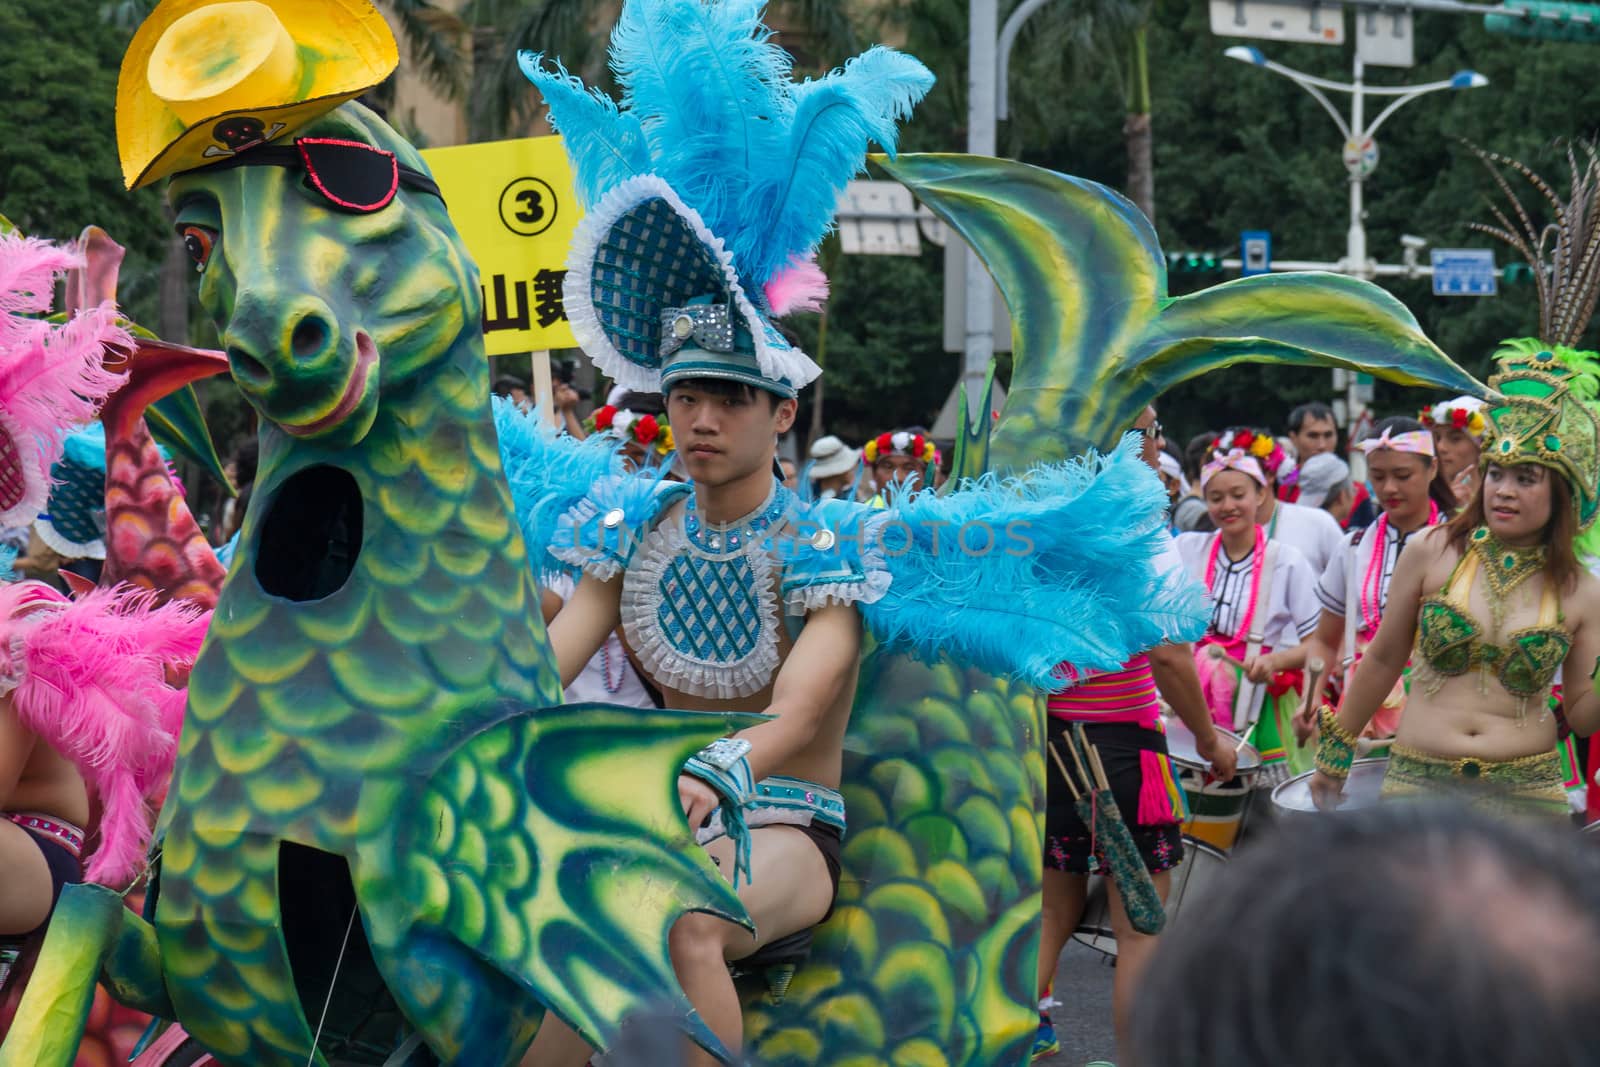 Costumed revelers march with floats in the annual Dream Parade on October 19, 2013, in Taipei, Taiwan.